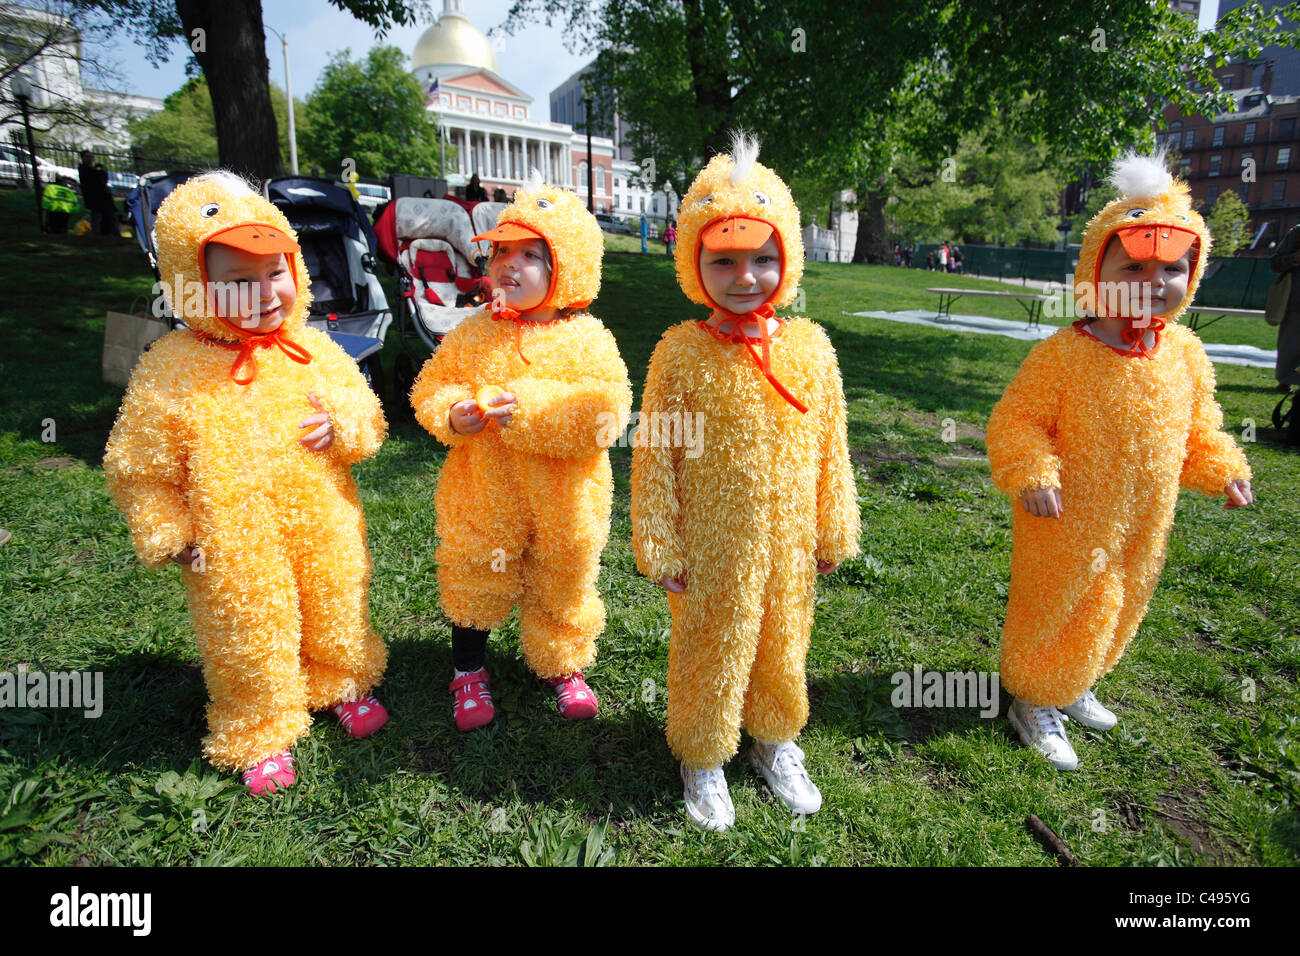 Children dressed in duck costumes, Duckling Day event by the State House on Boston Common, Boston, Massachusetts Stock Photo